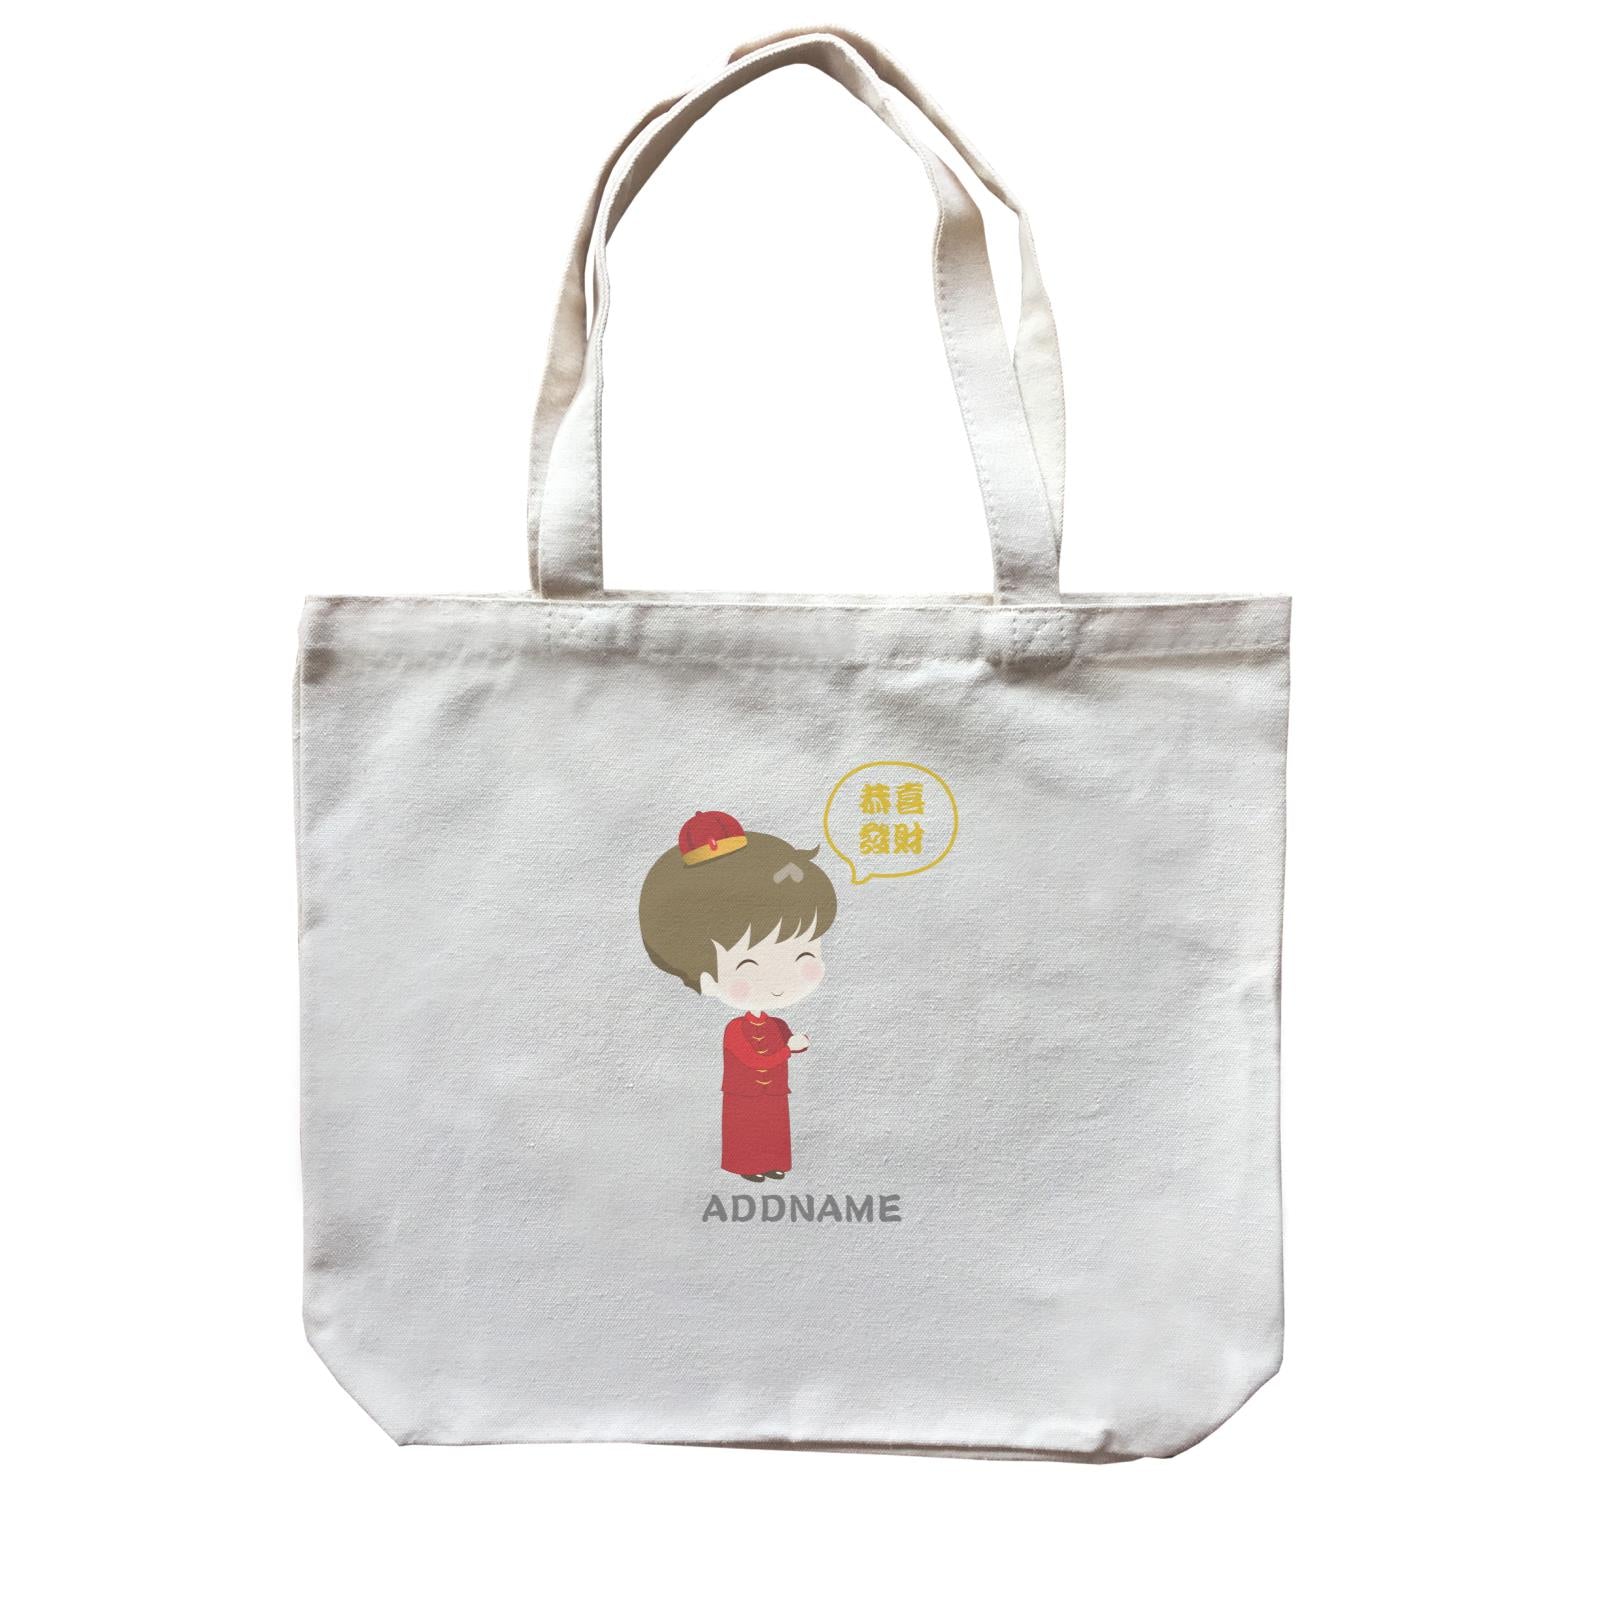 Chinese New Year Family Gong Xi Fai Cai Daddy Addname Canvas Bag